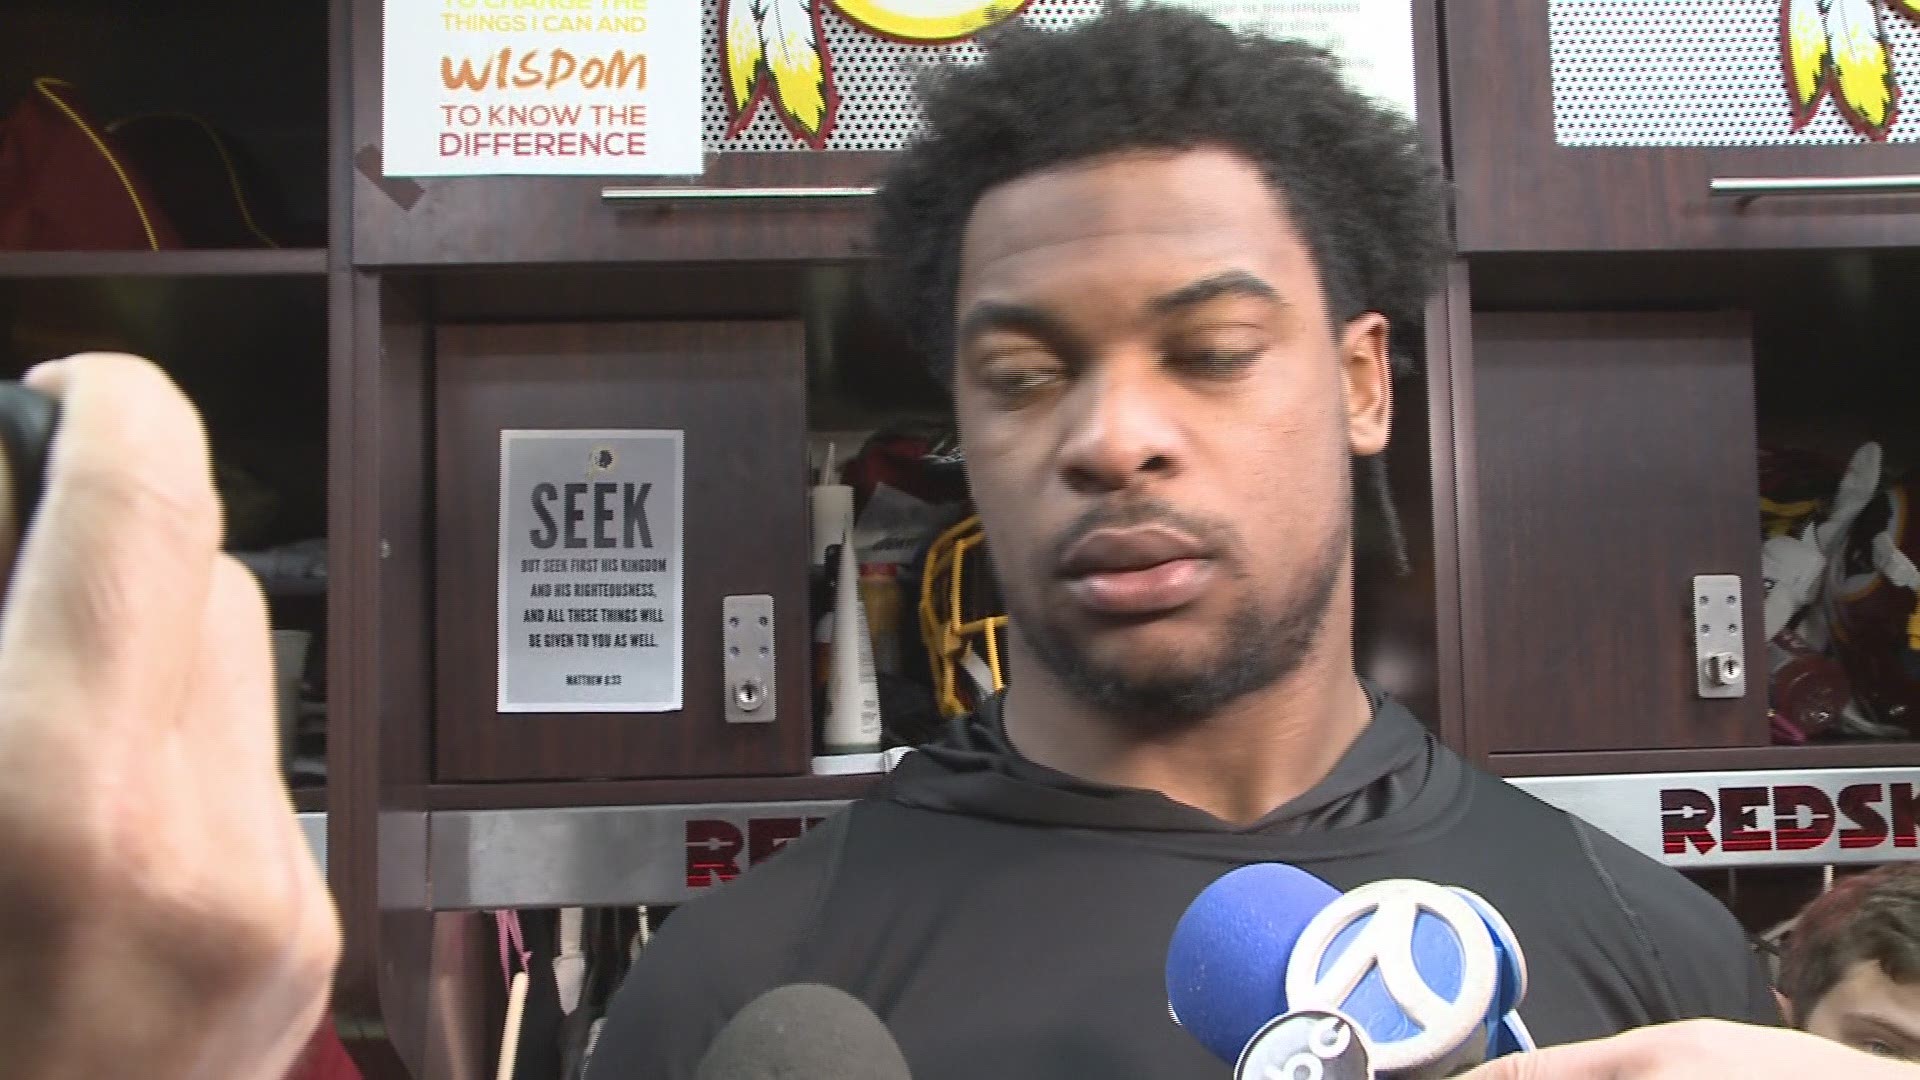 The Redskins safety broke his silence on the incident with the 21-year-old woman who overdosed after leaving Nicholson's residence.